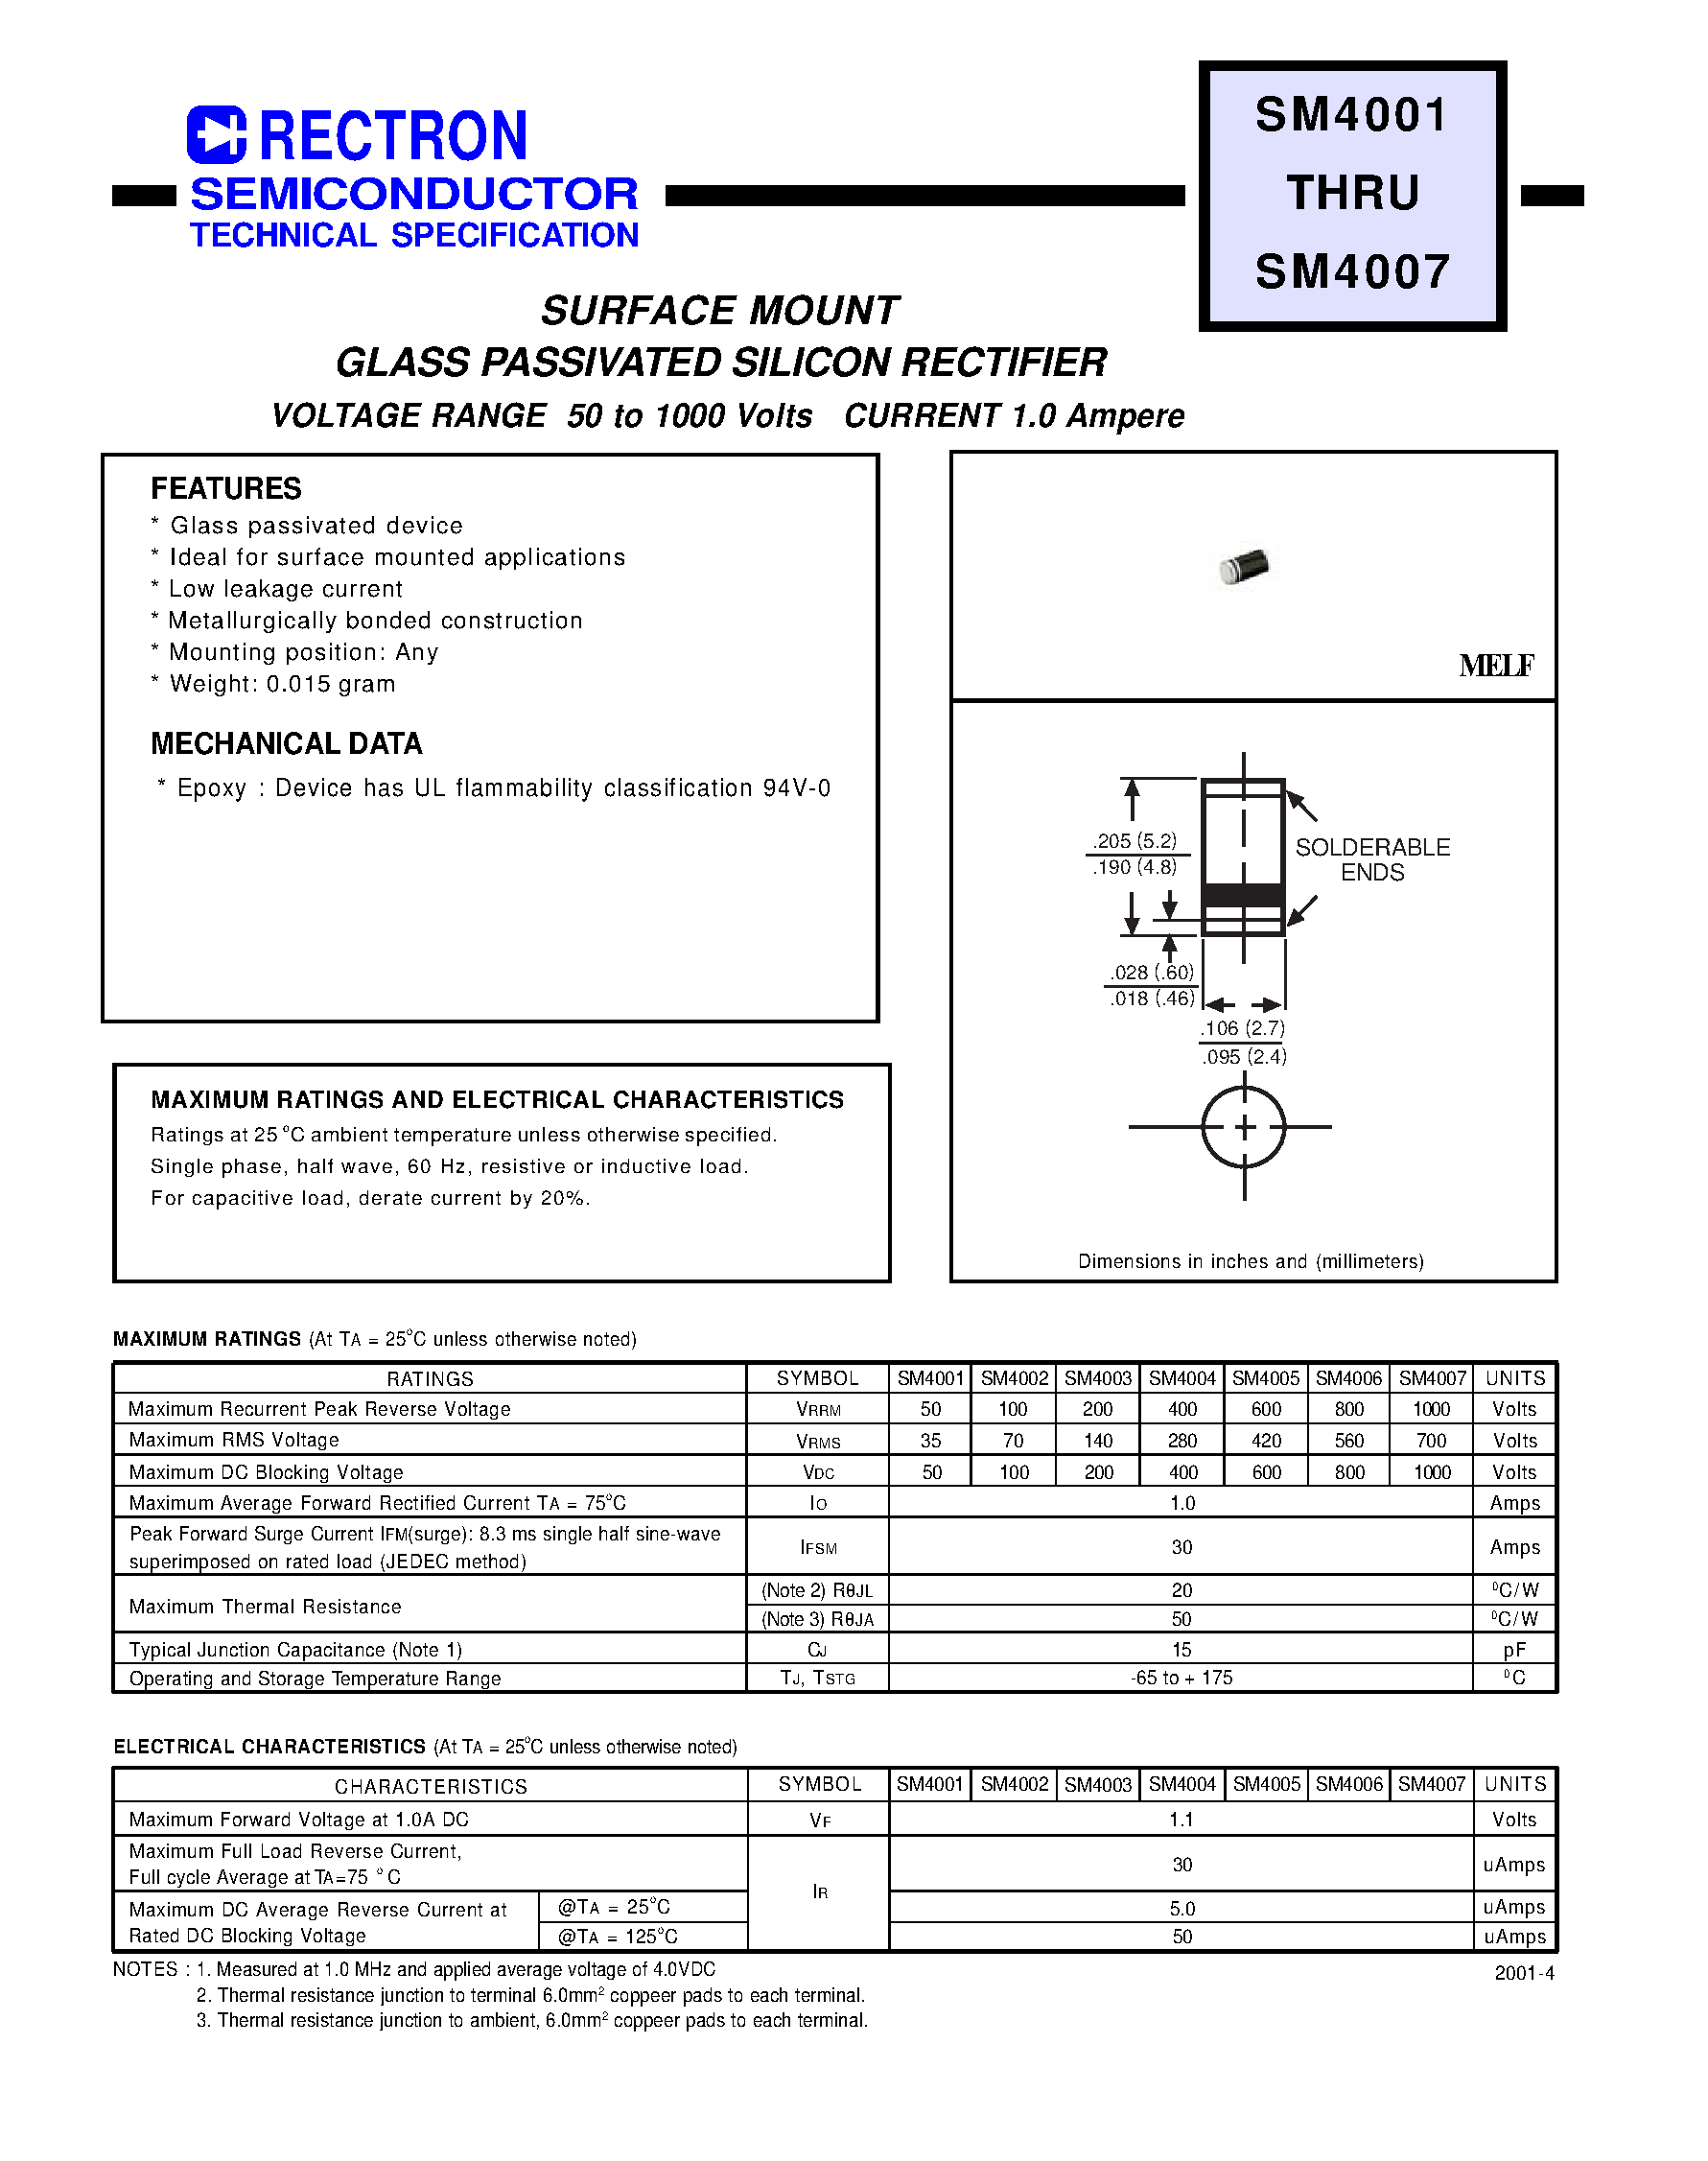 Даташит SM4004 - SURFACE MOUNT GLASS PASSIVATED SILICON RECTIFIER (VOLTAGE RANGE 50 to 1000 Volts CURRENT 1.0 Ampere) страница 1